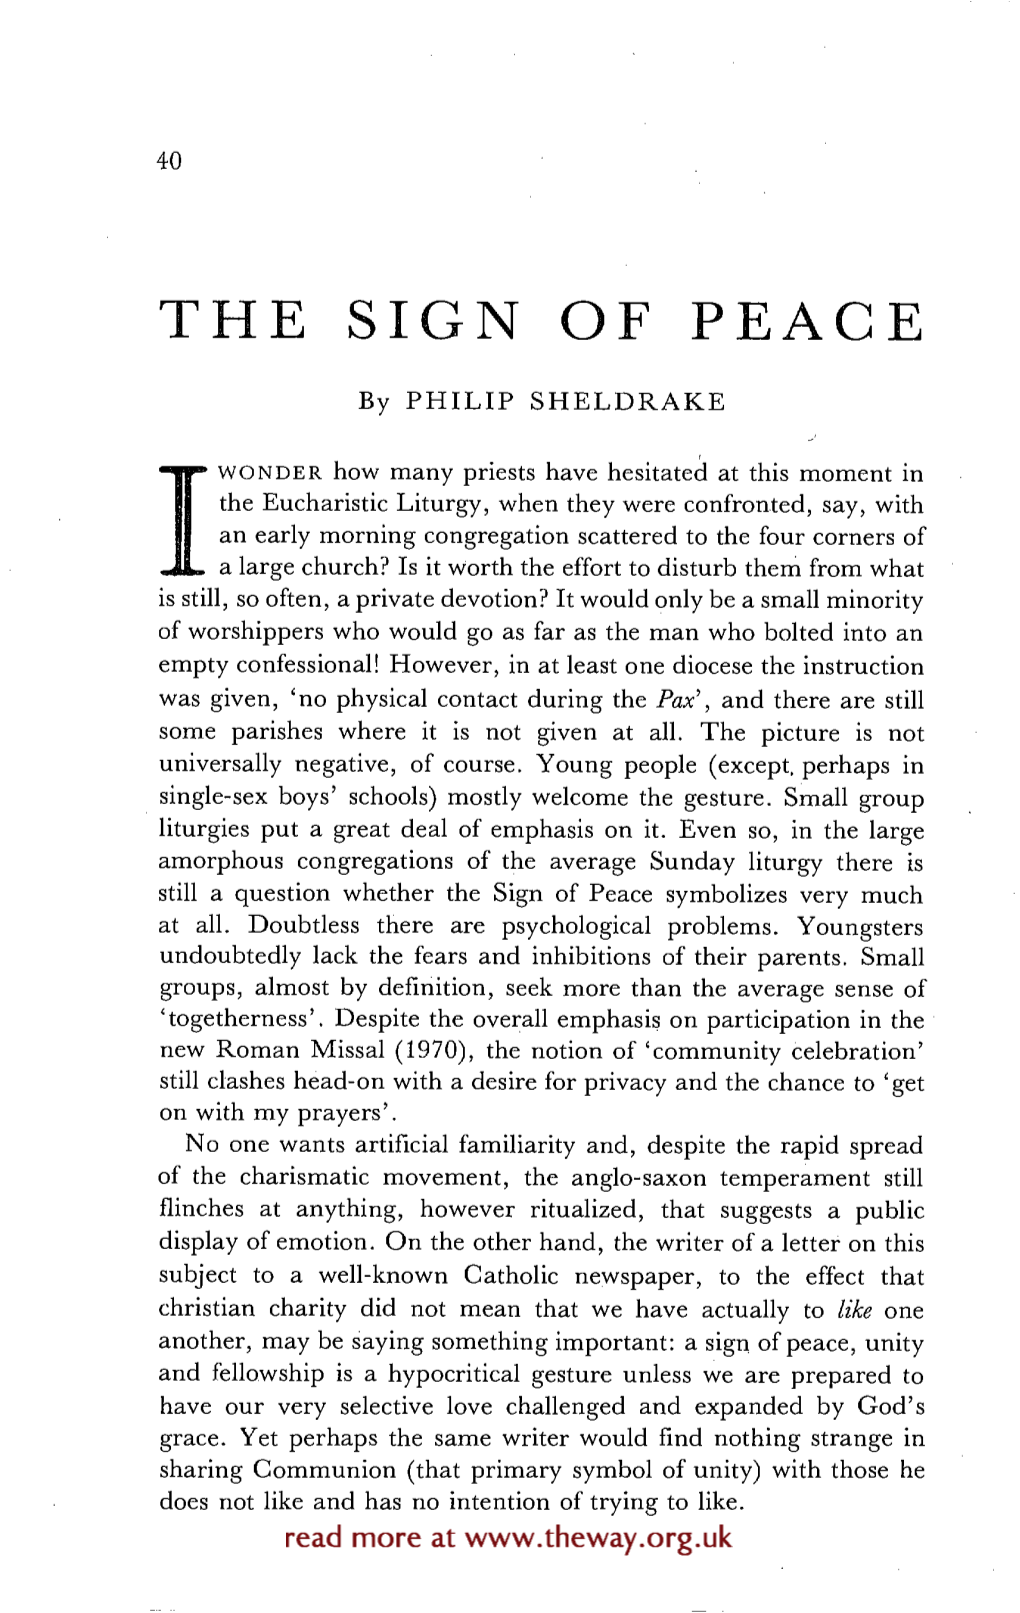 The Sign of Peace